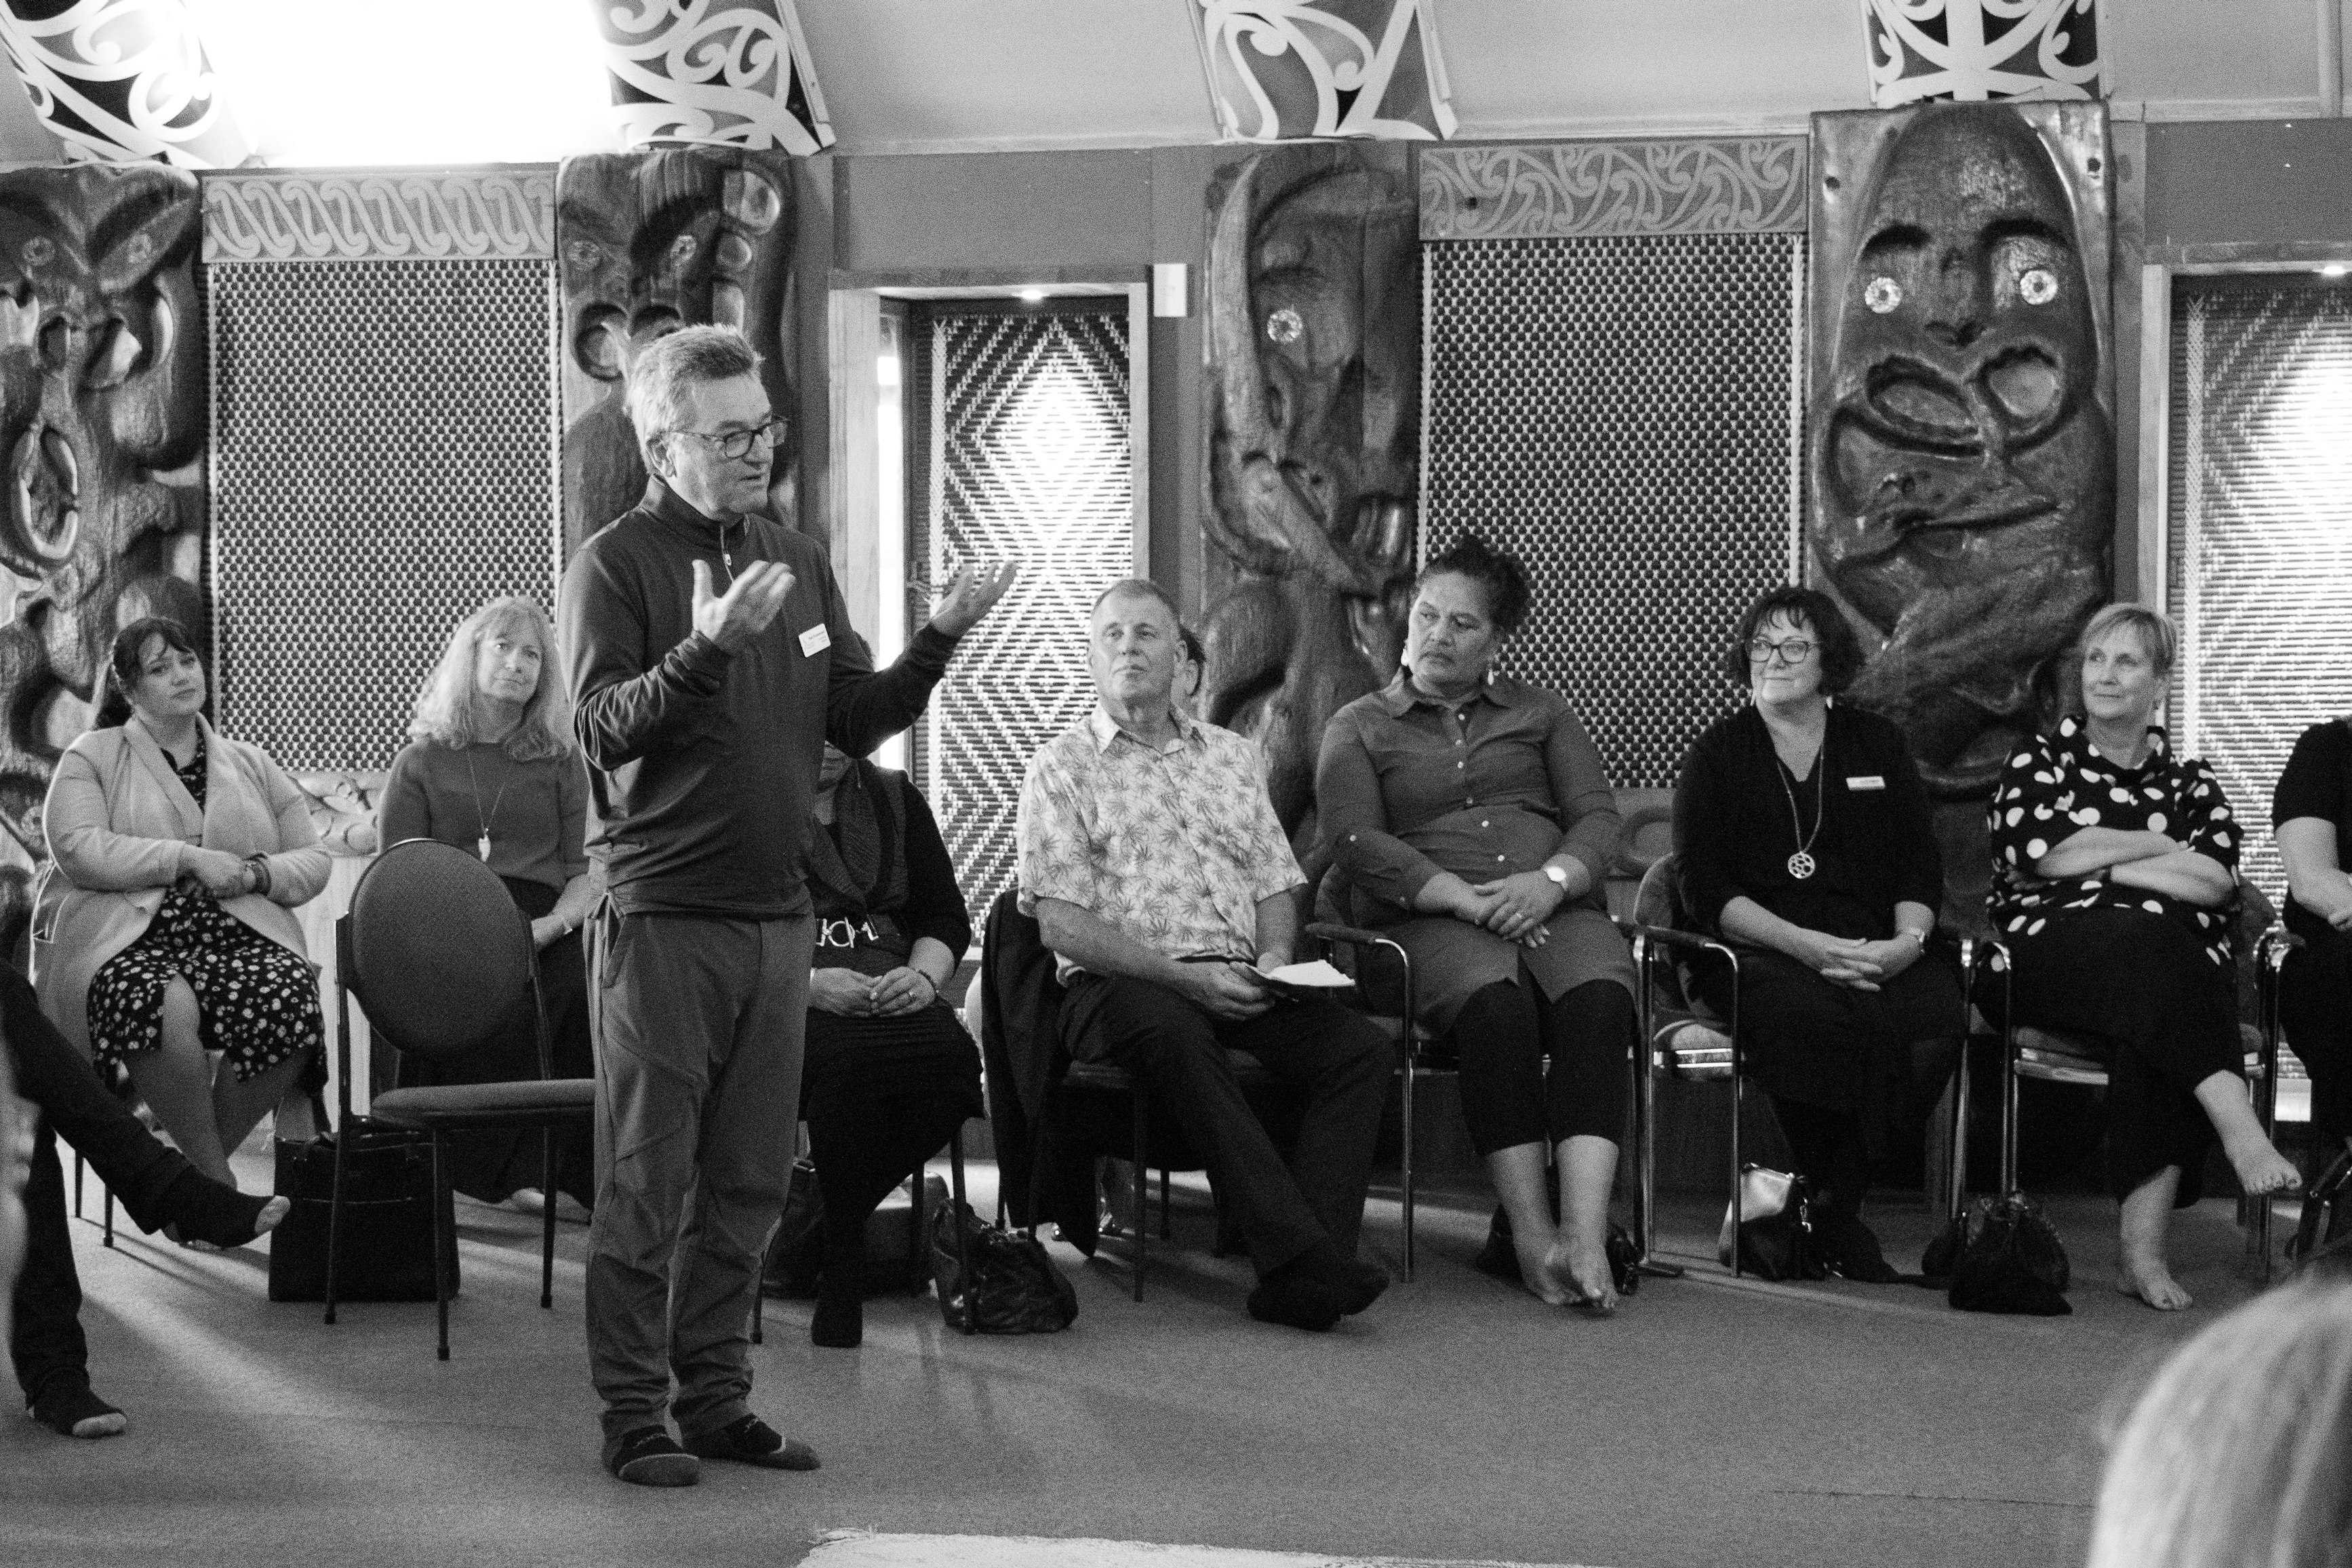 Person standing speaking to others inside a whare